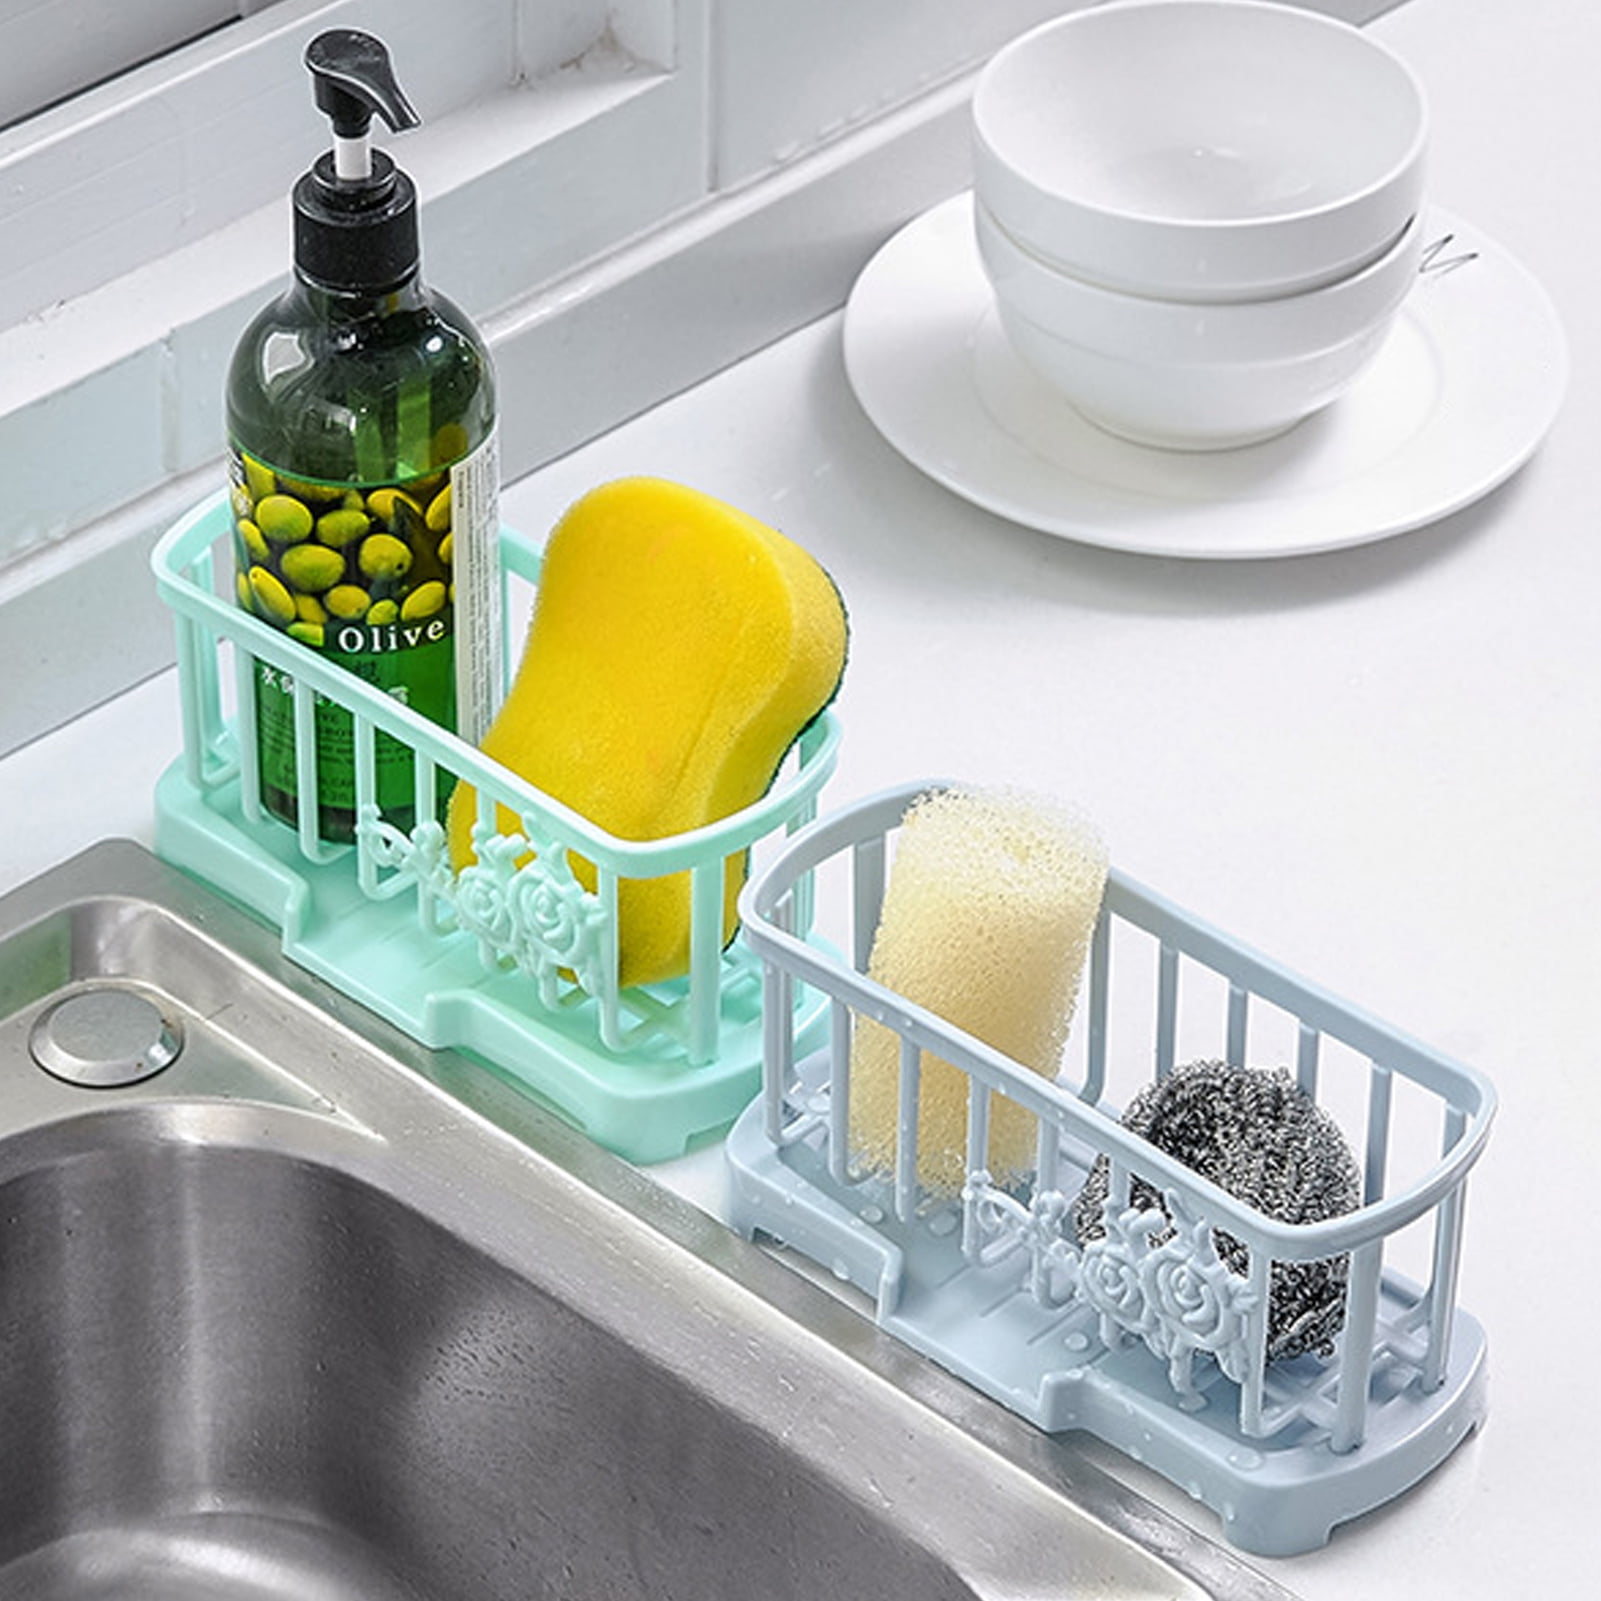 Vanwood Sponge Holder for Kitchen Sink with Auto Draining Tray, Sink Caddy  Kitchen Sink Cocina Organizer, Self Drain Dish Soap Sponge Caddy for